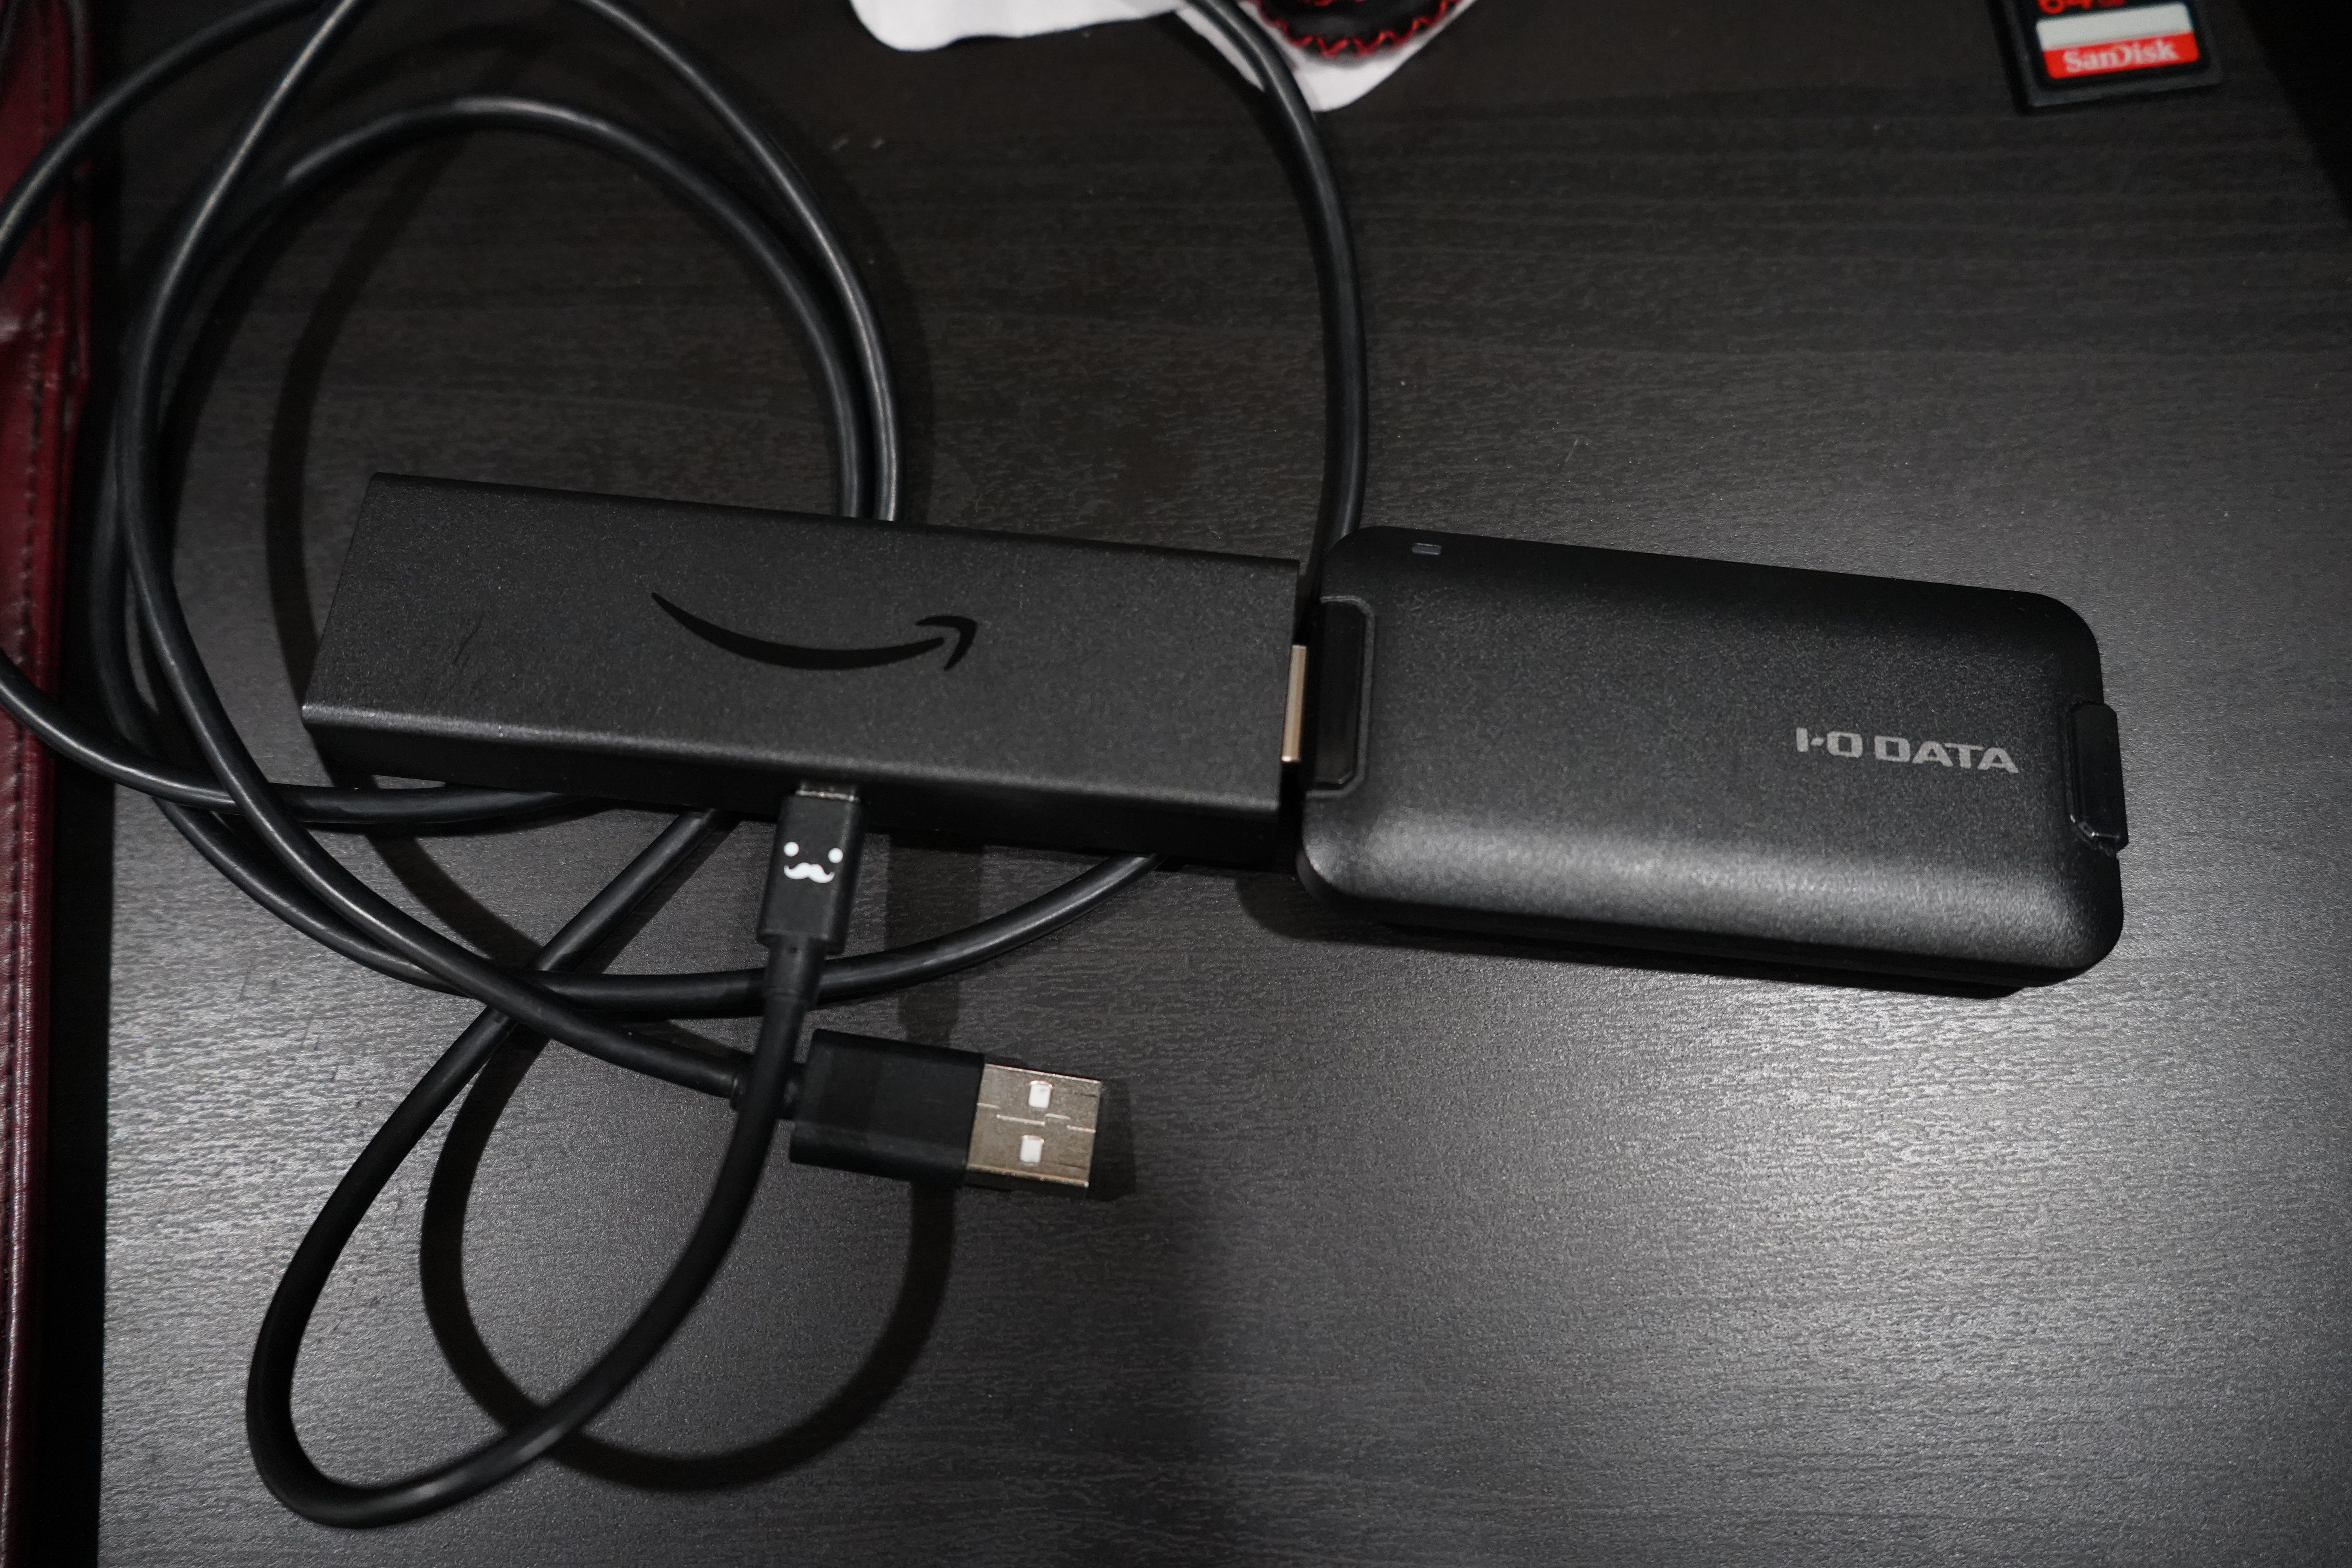 1st strategy - use HDMI capture device